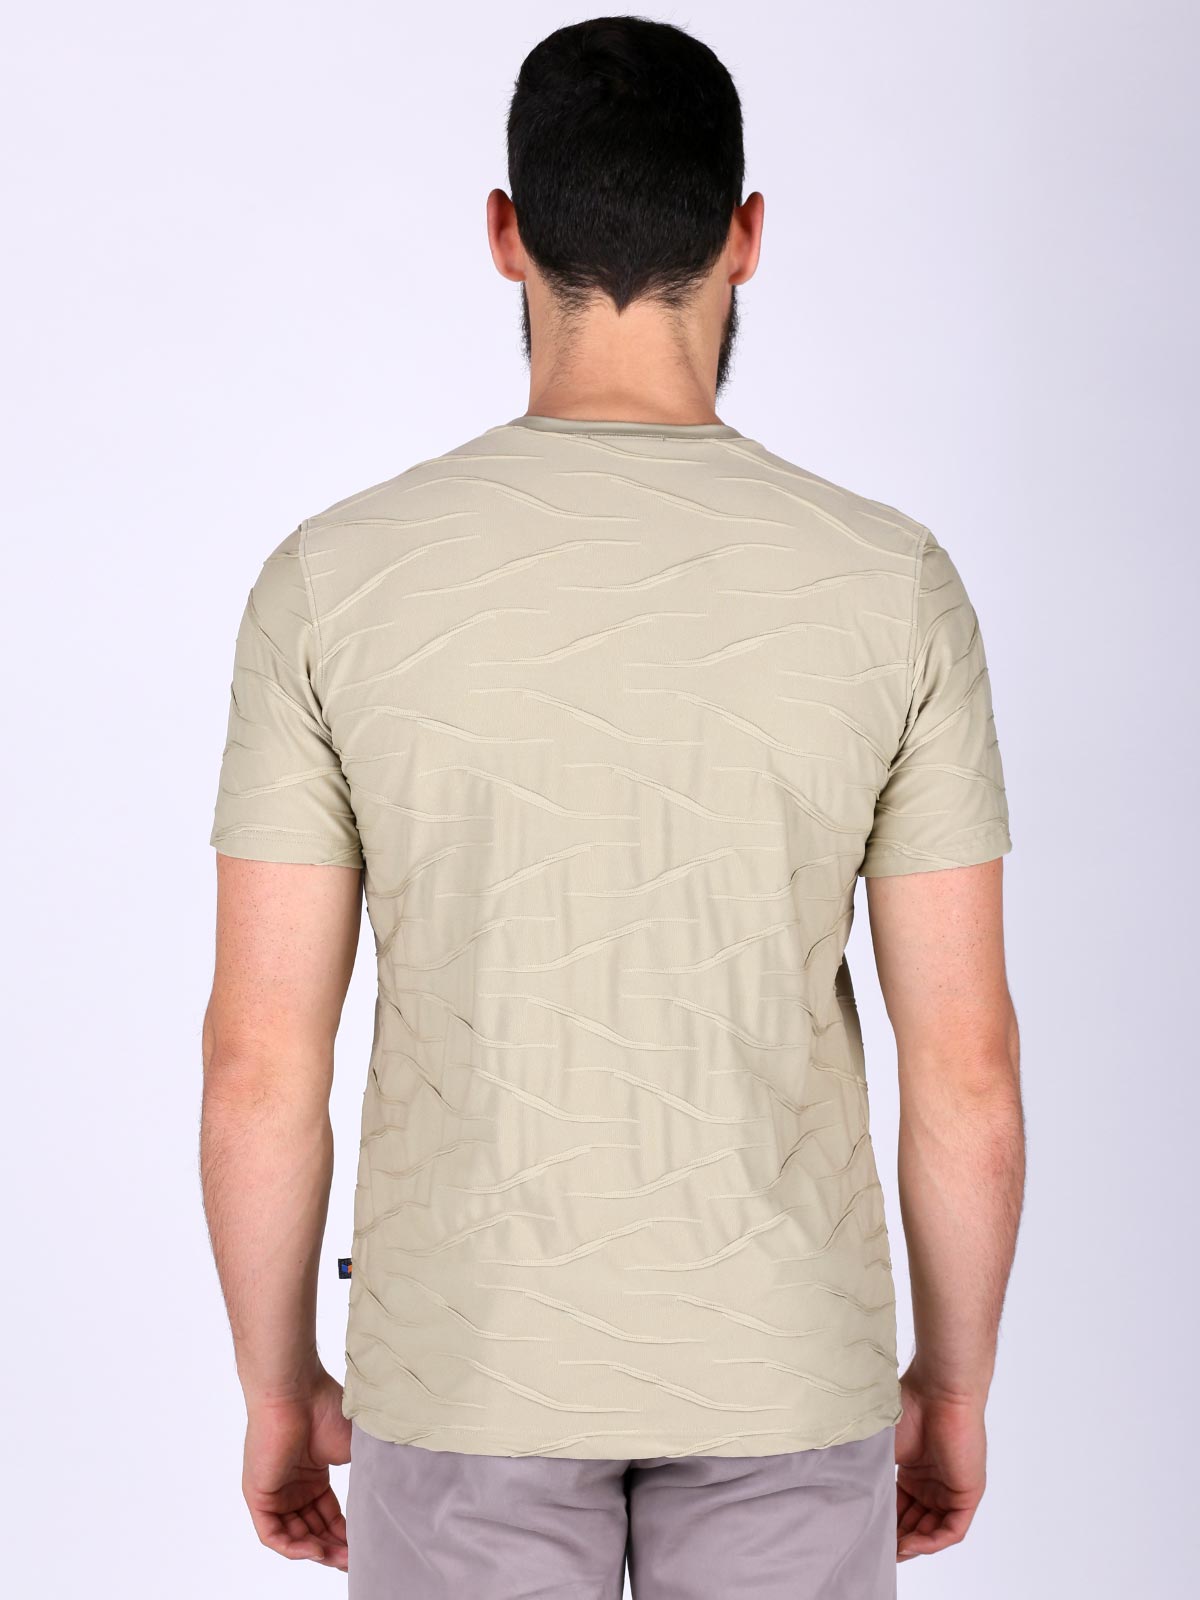  tshirt with embossed waves  - 88031 € 6.75 img2